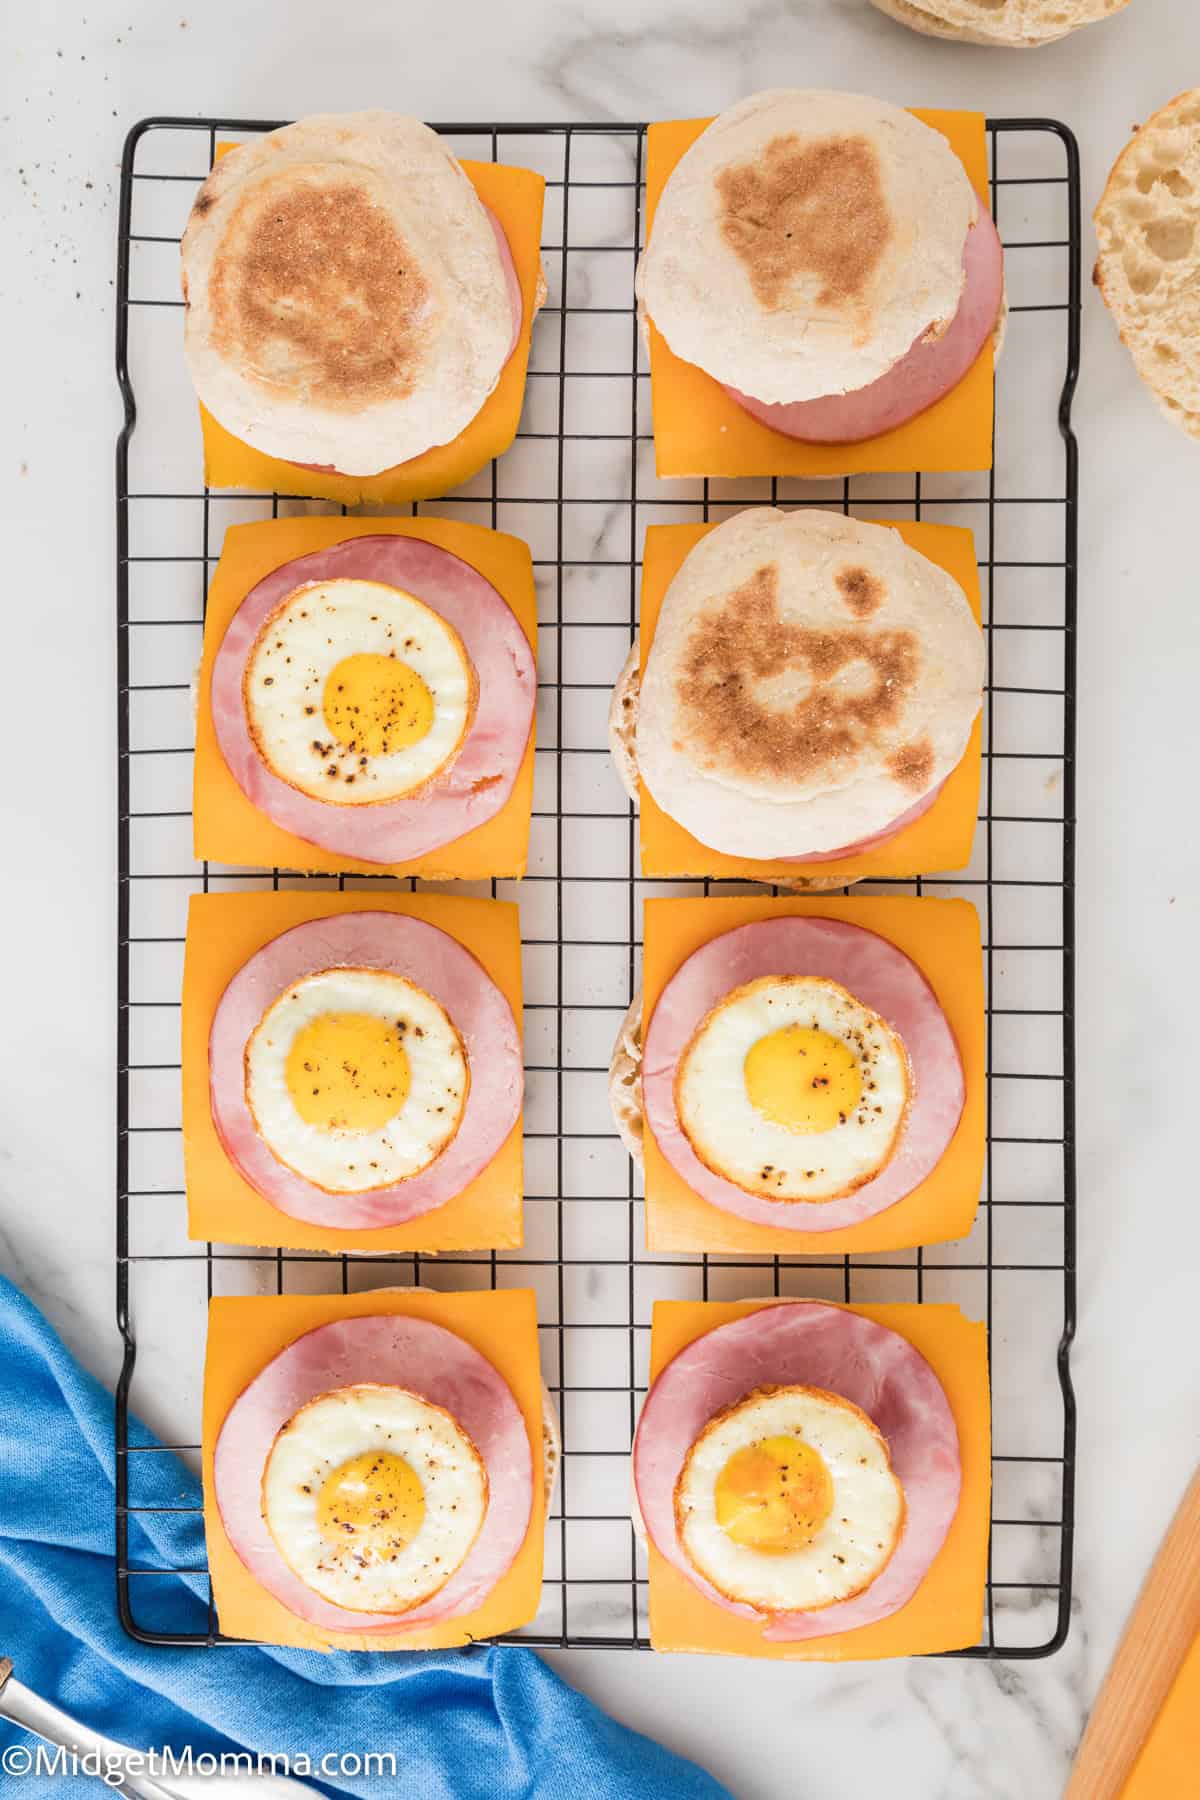 Wire rack holding eight breakfast sandwiches made with English muffins, cheddar cheese, ham, and eggs.